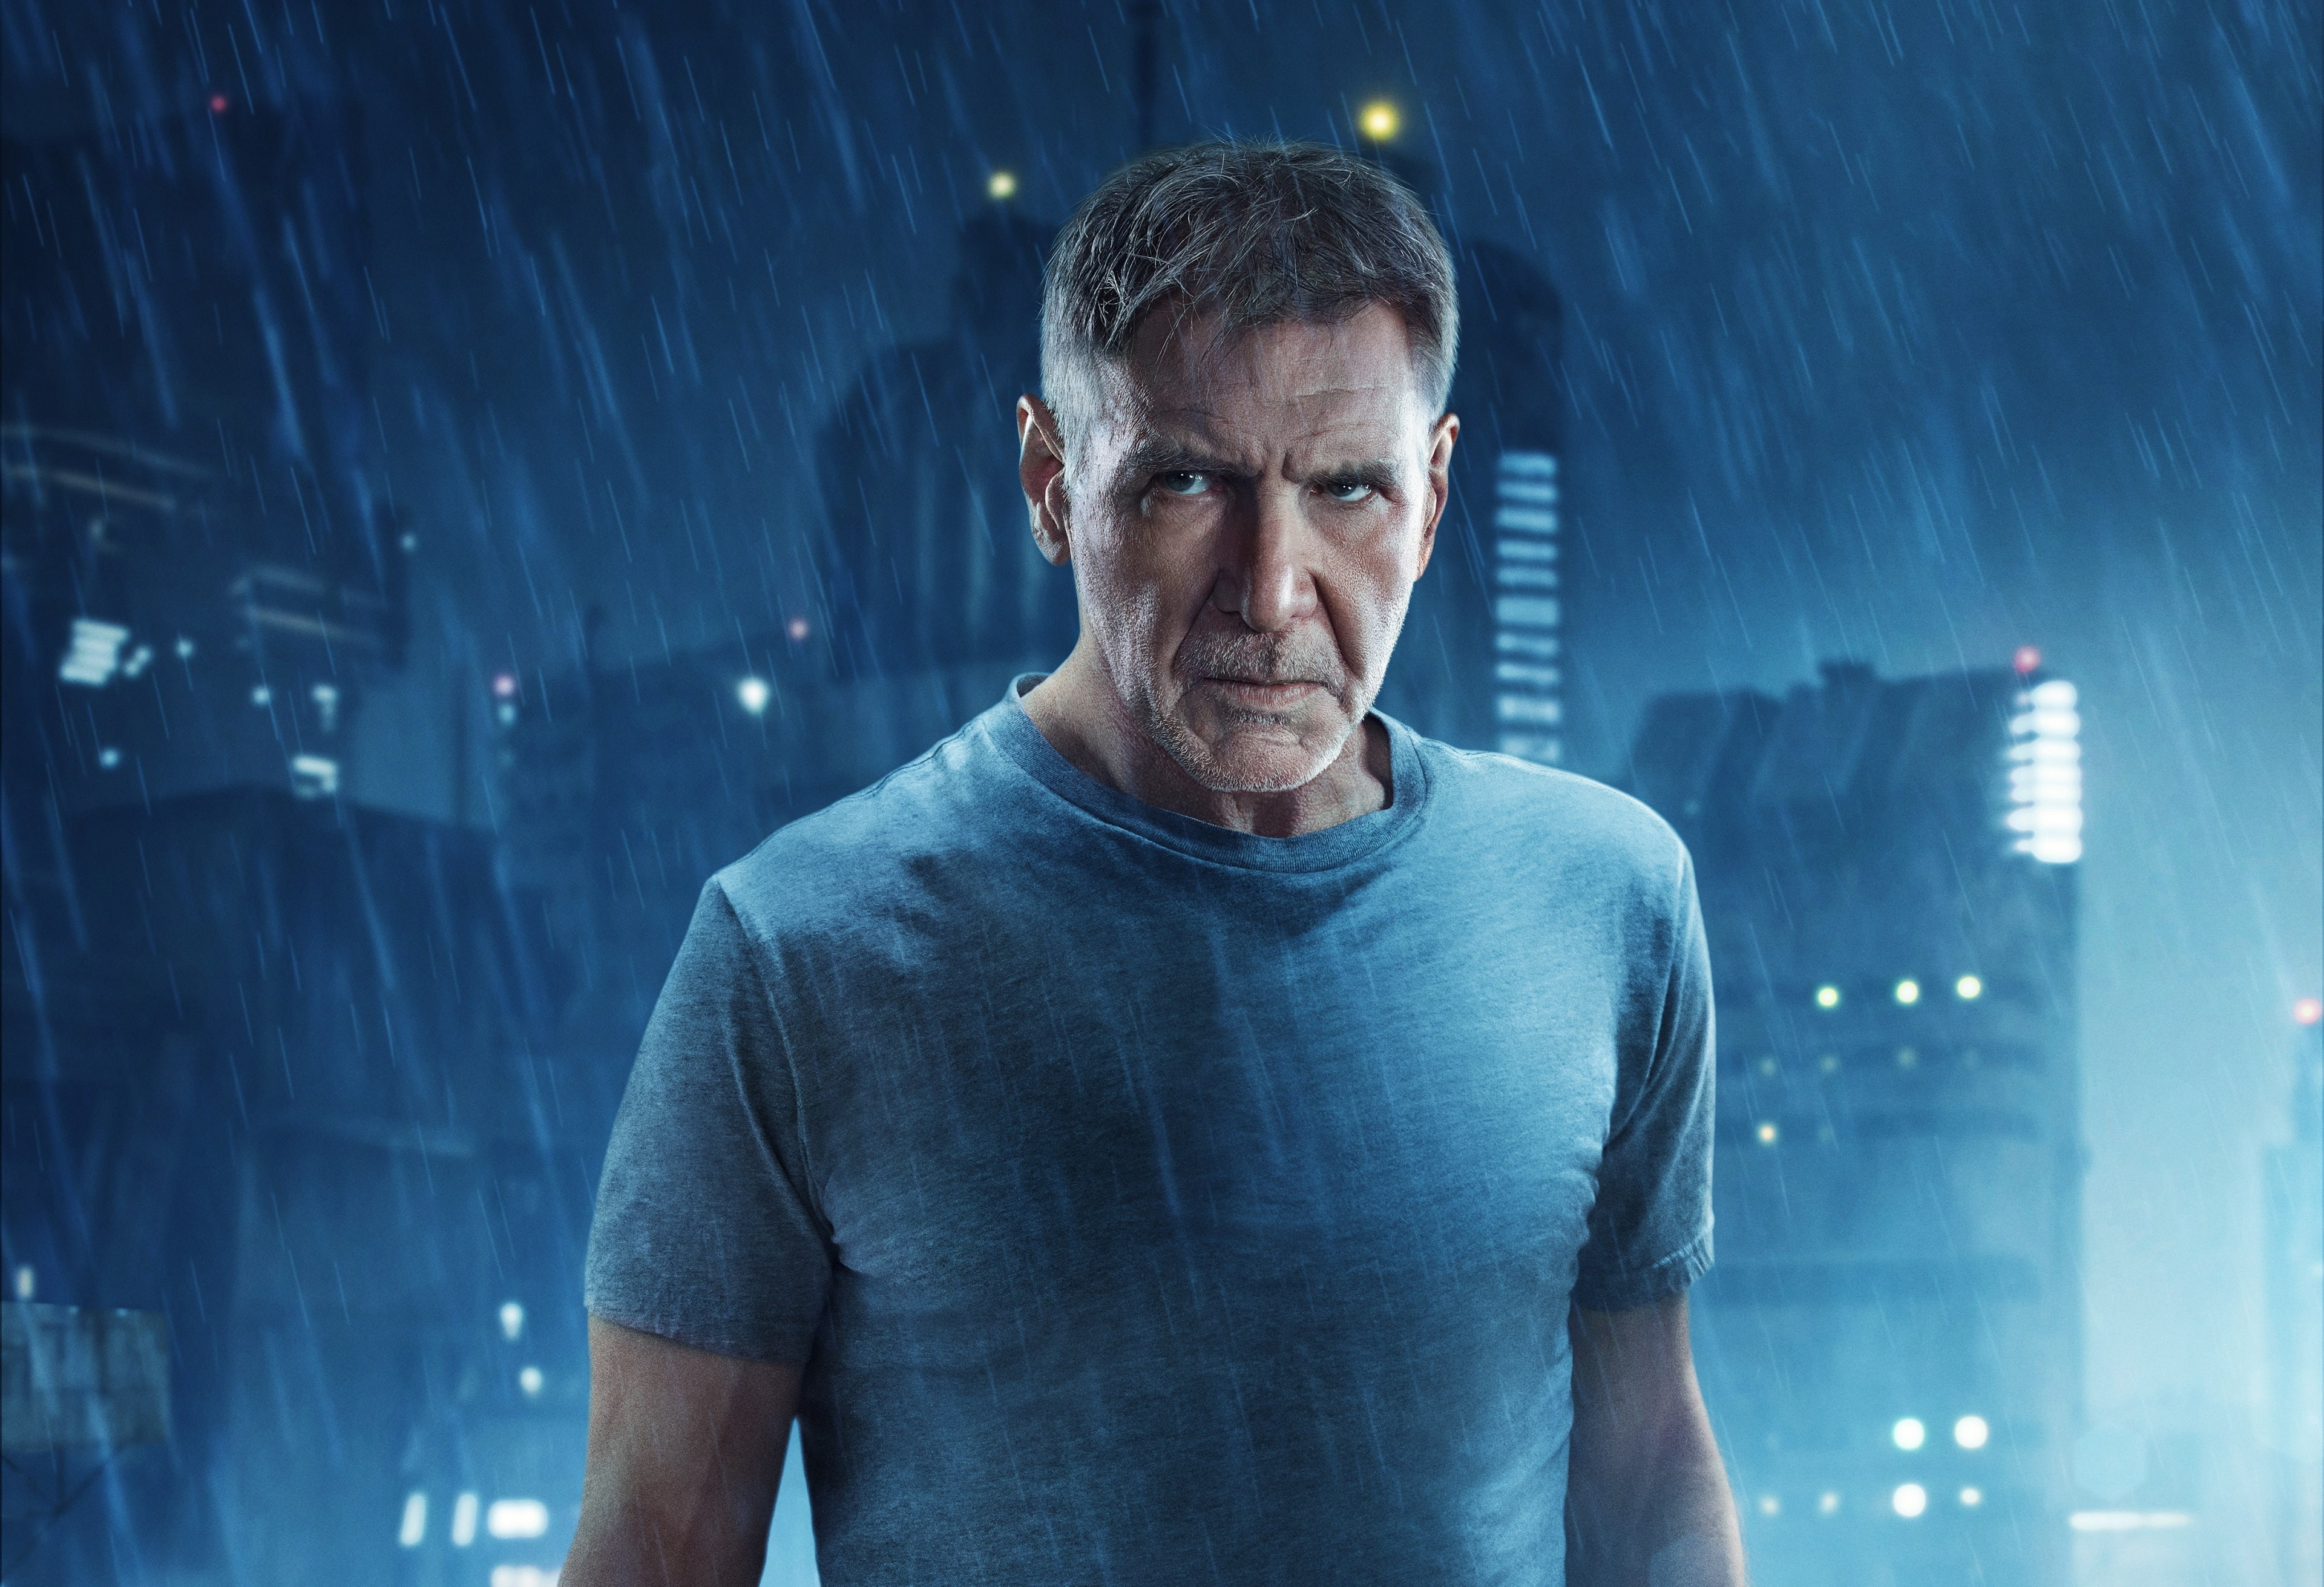 blade runner 2049 4k windows, one person, front view, night